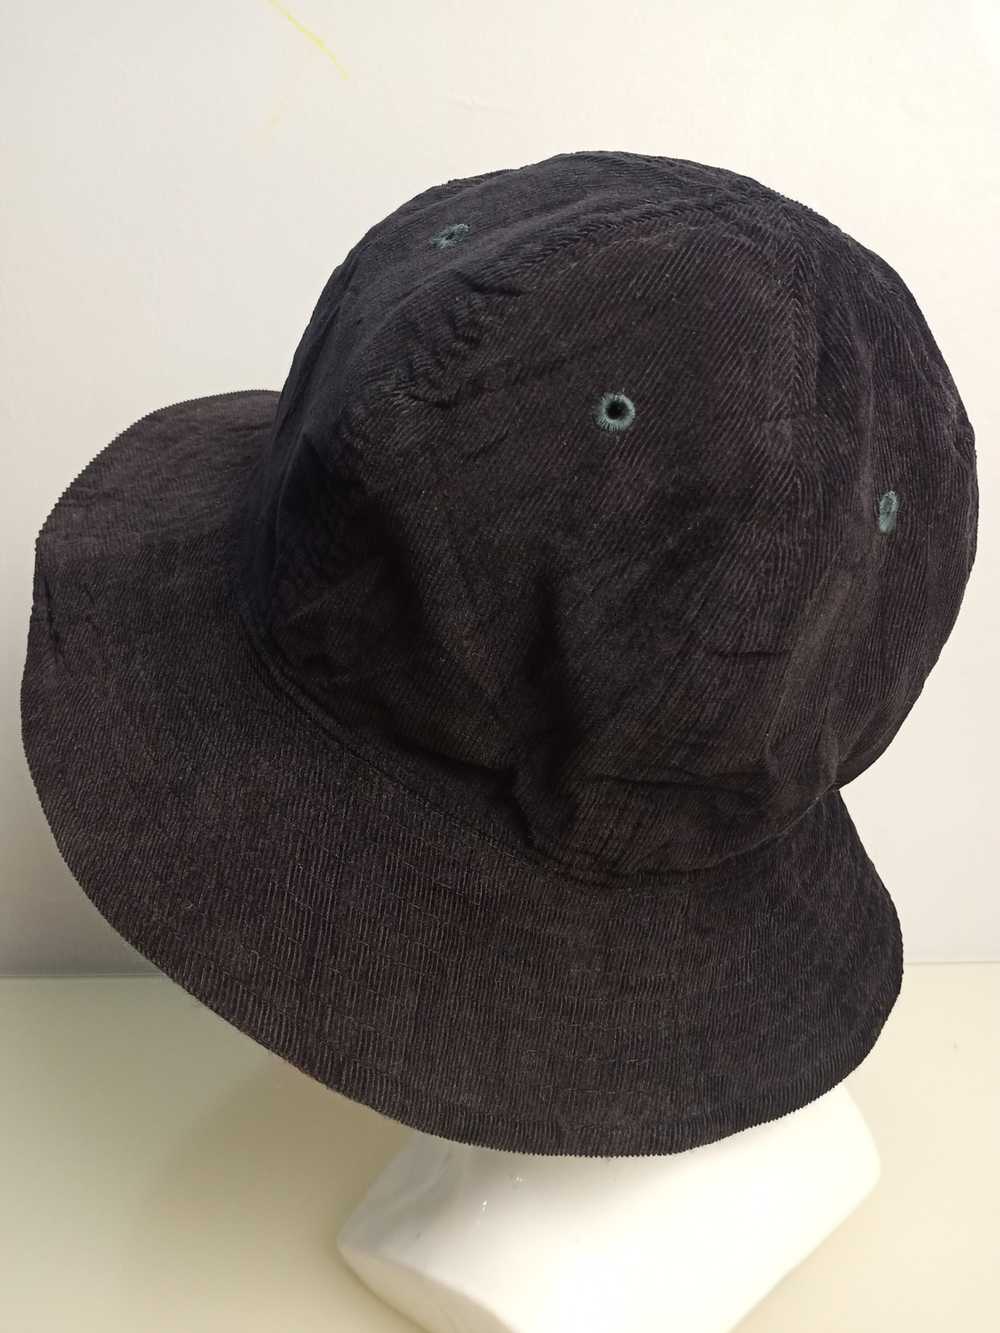 Other × Streetwear Unbranded Riversible Hat - image 7